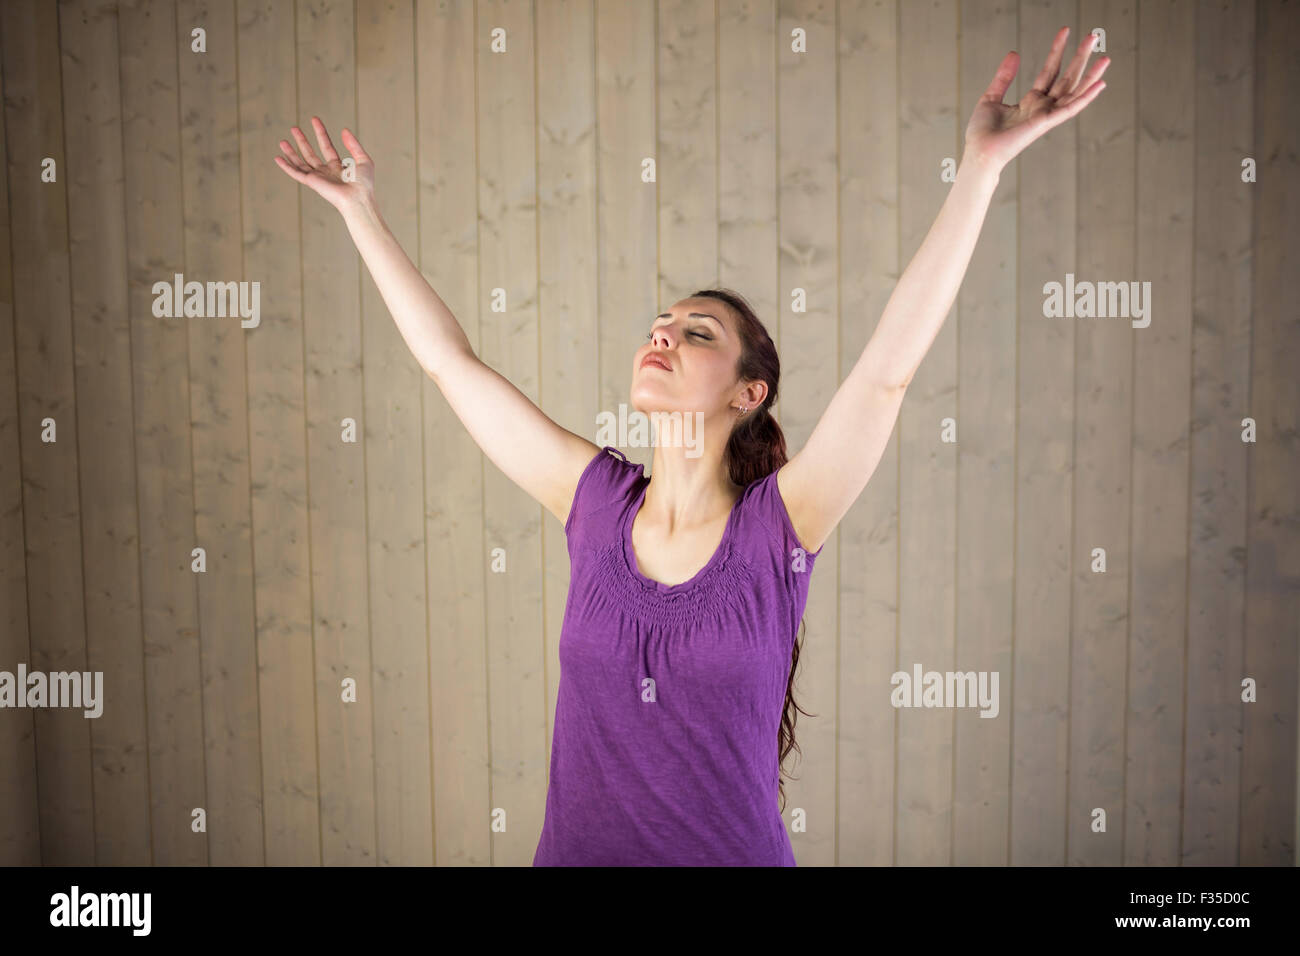 Woman with arms raised and eyes closed Stock Photo